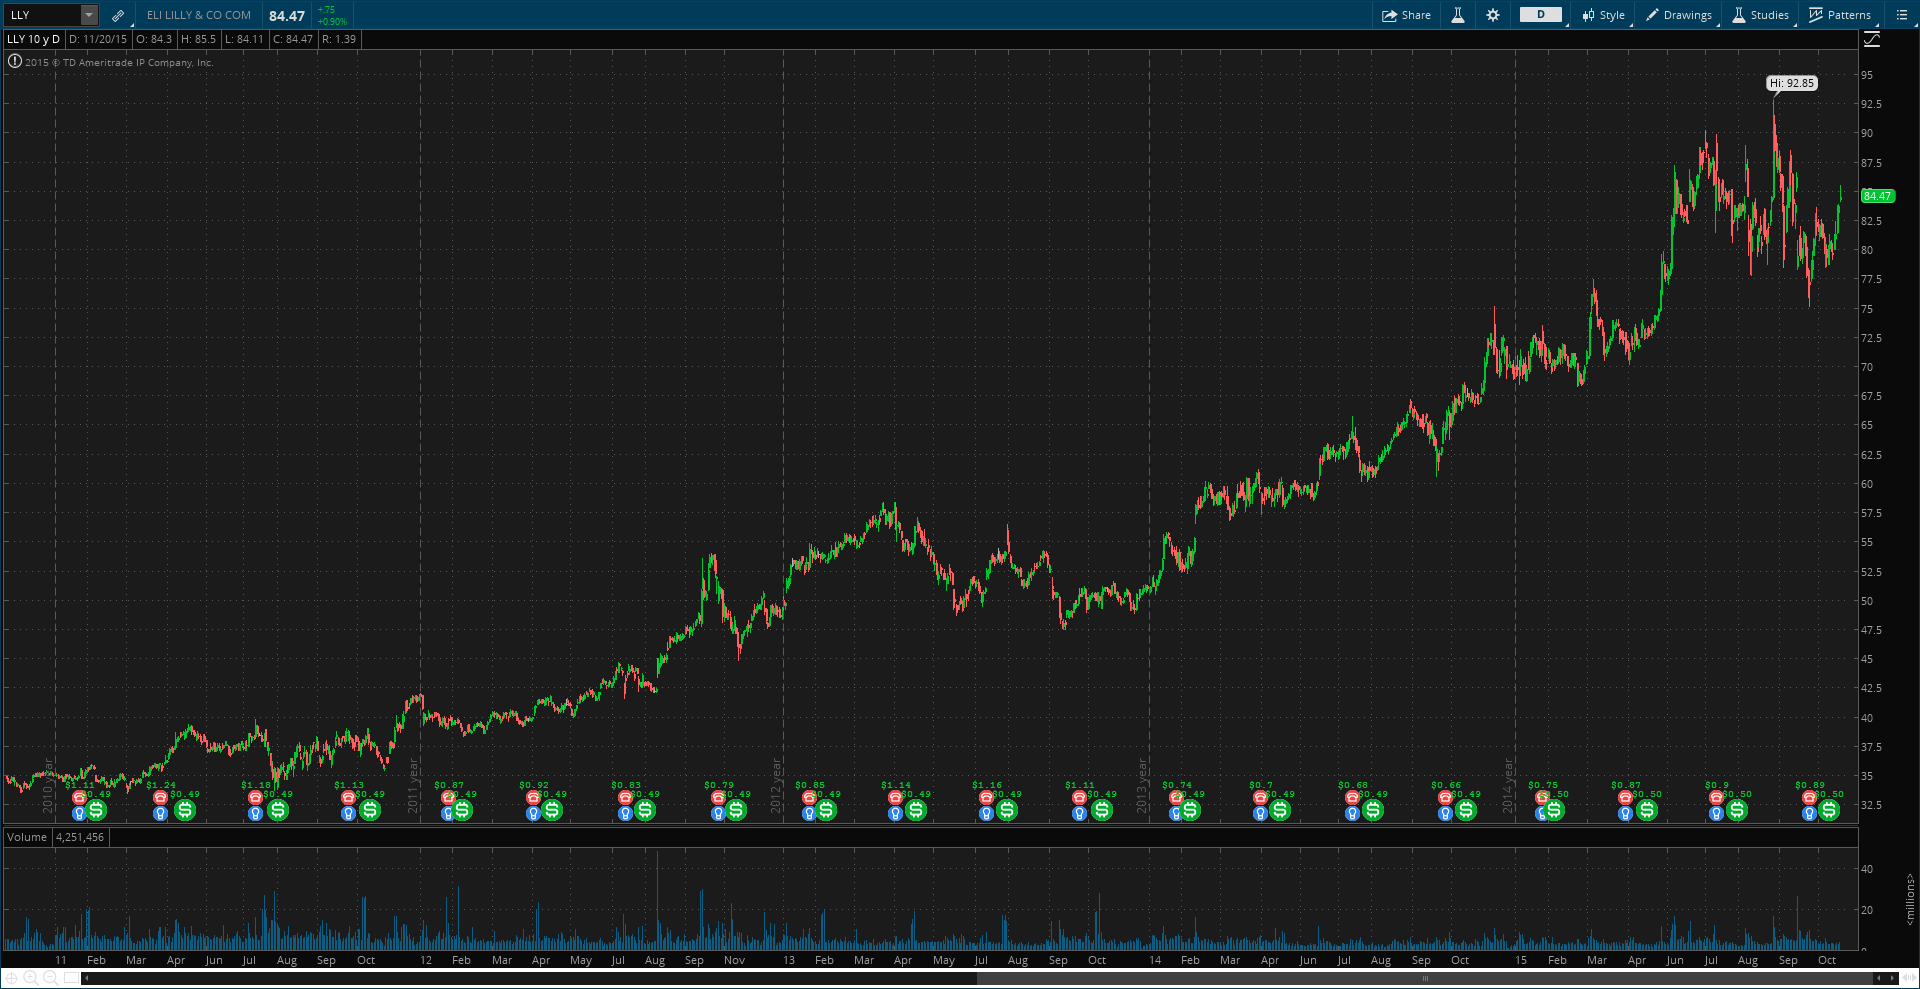 Eli Lilly (LLY) - Past 5-Years